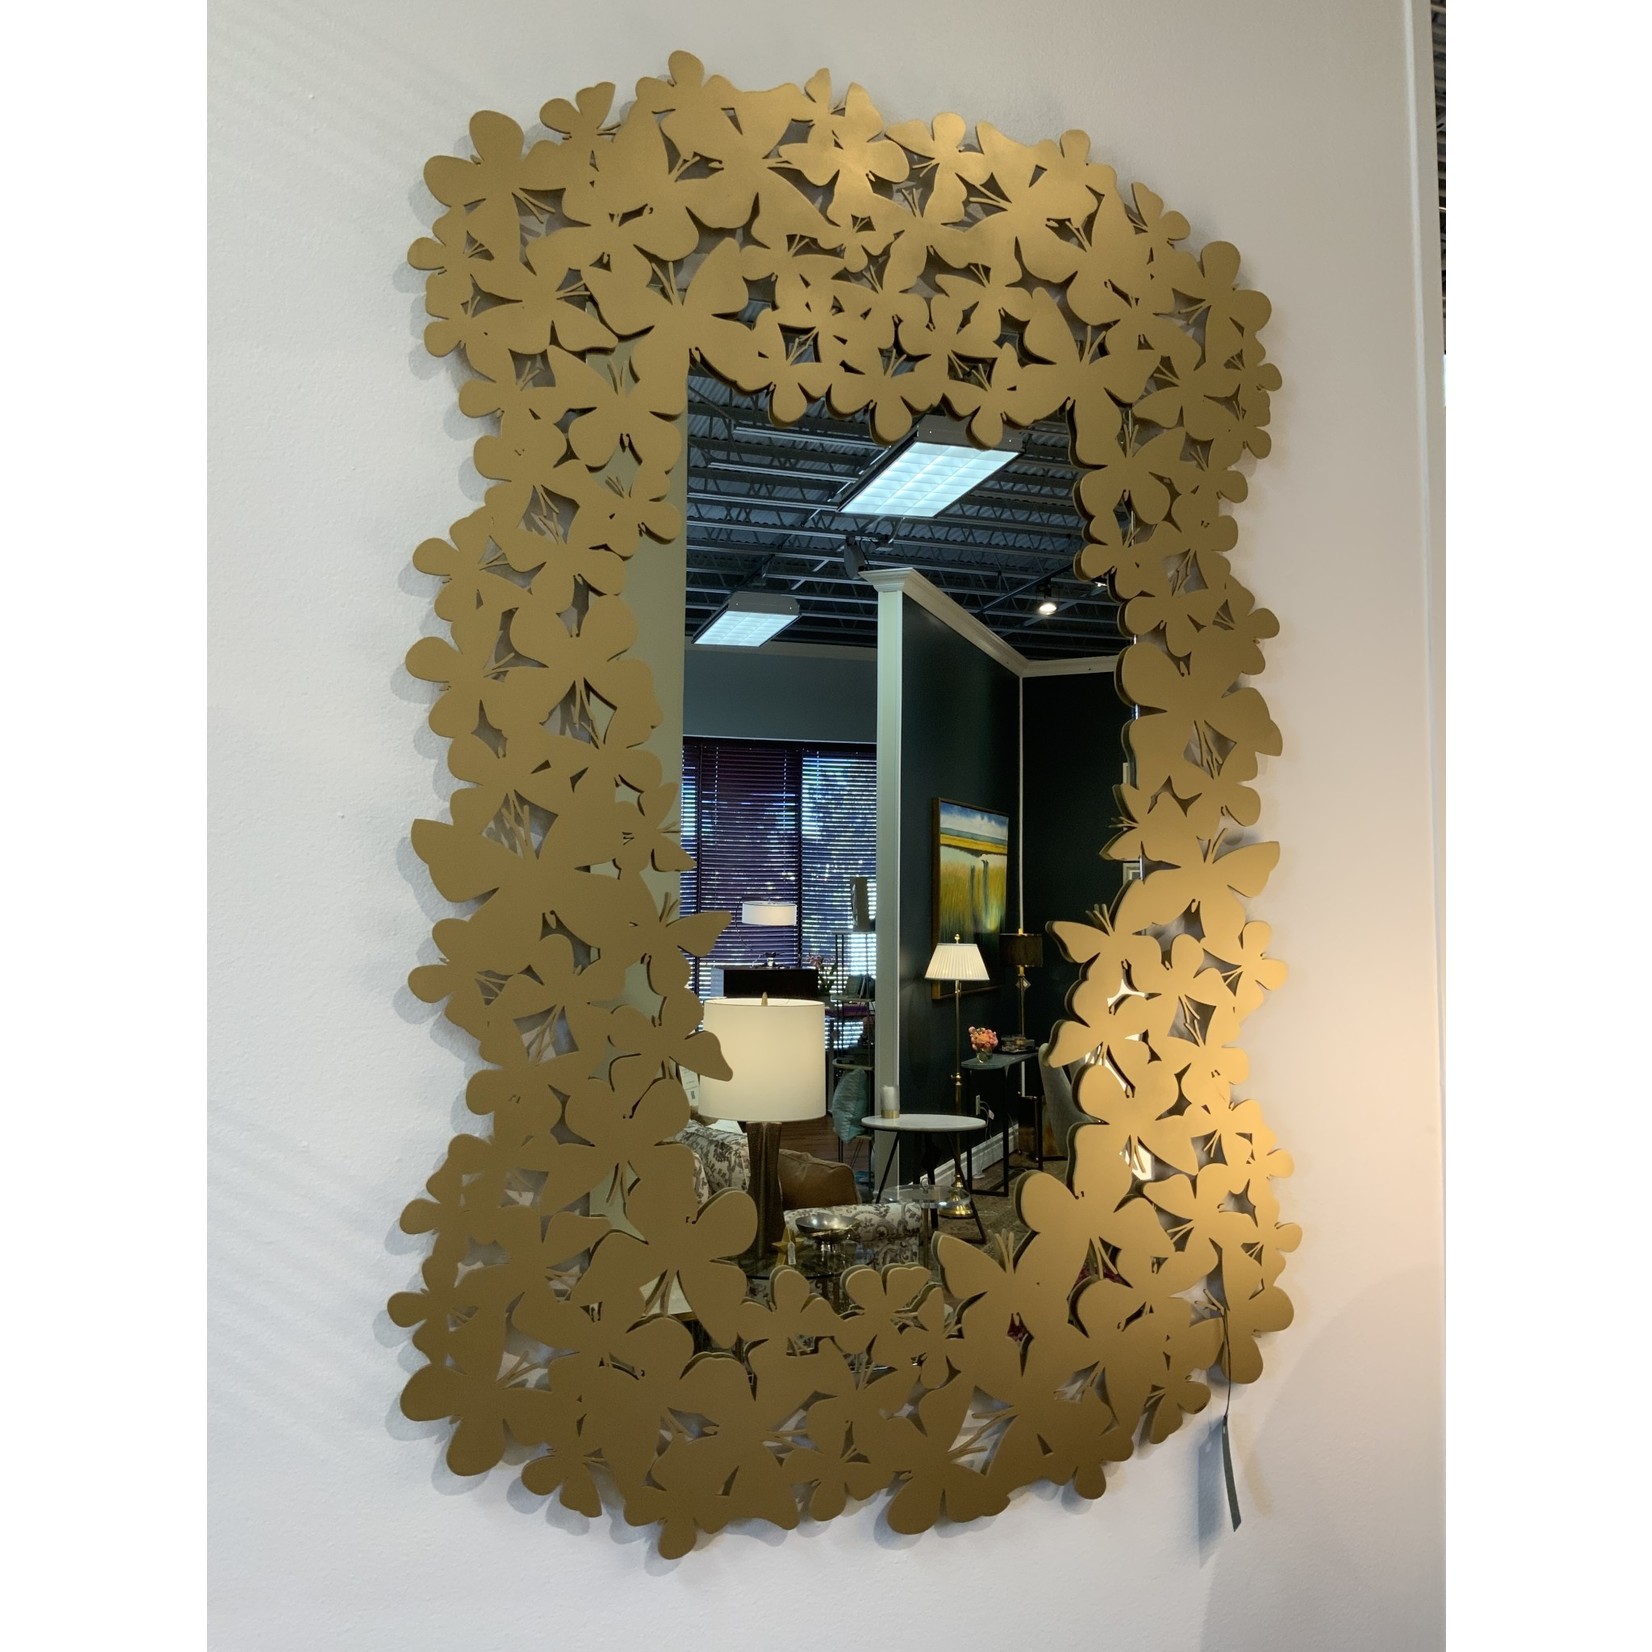 Tommy Mitchell Company Butterfly Gold Mirror